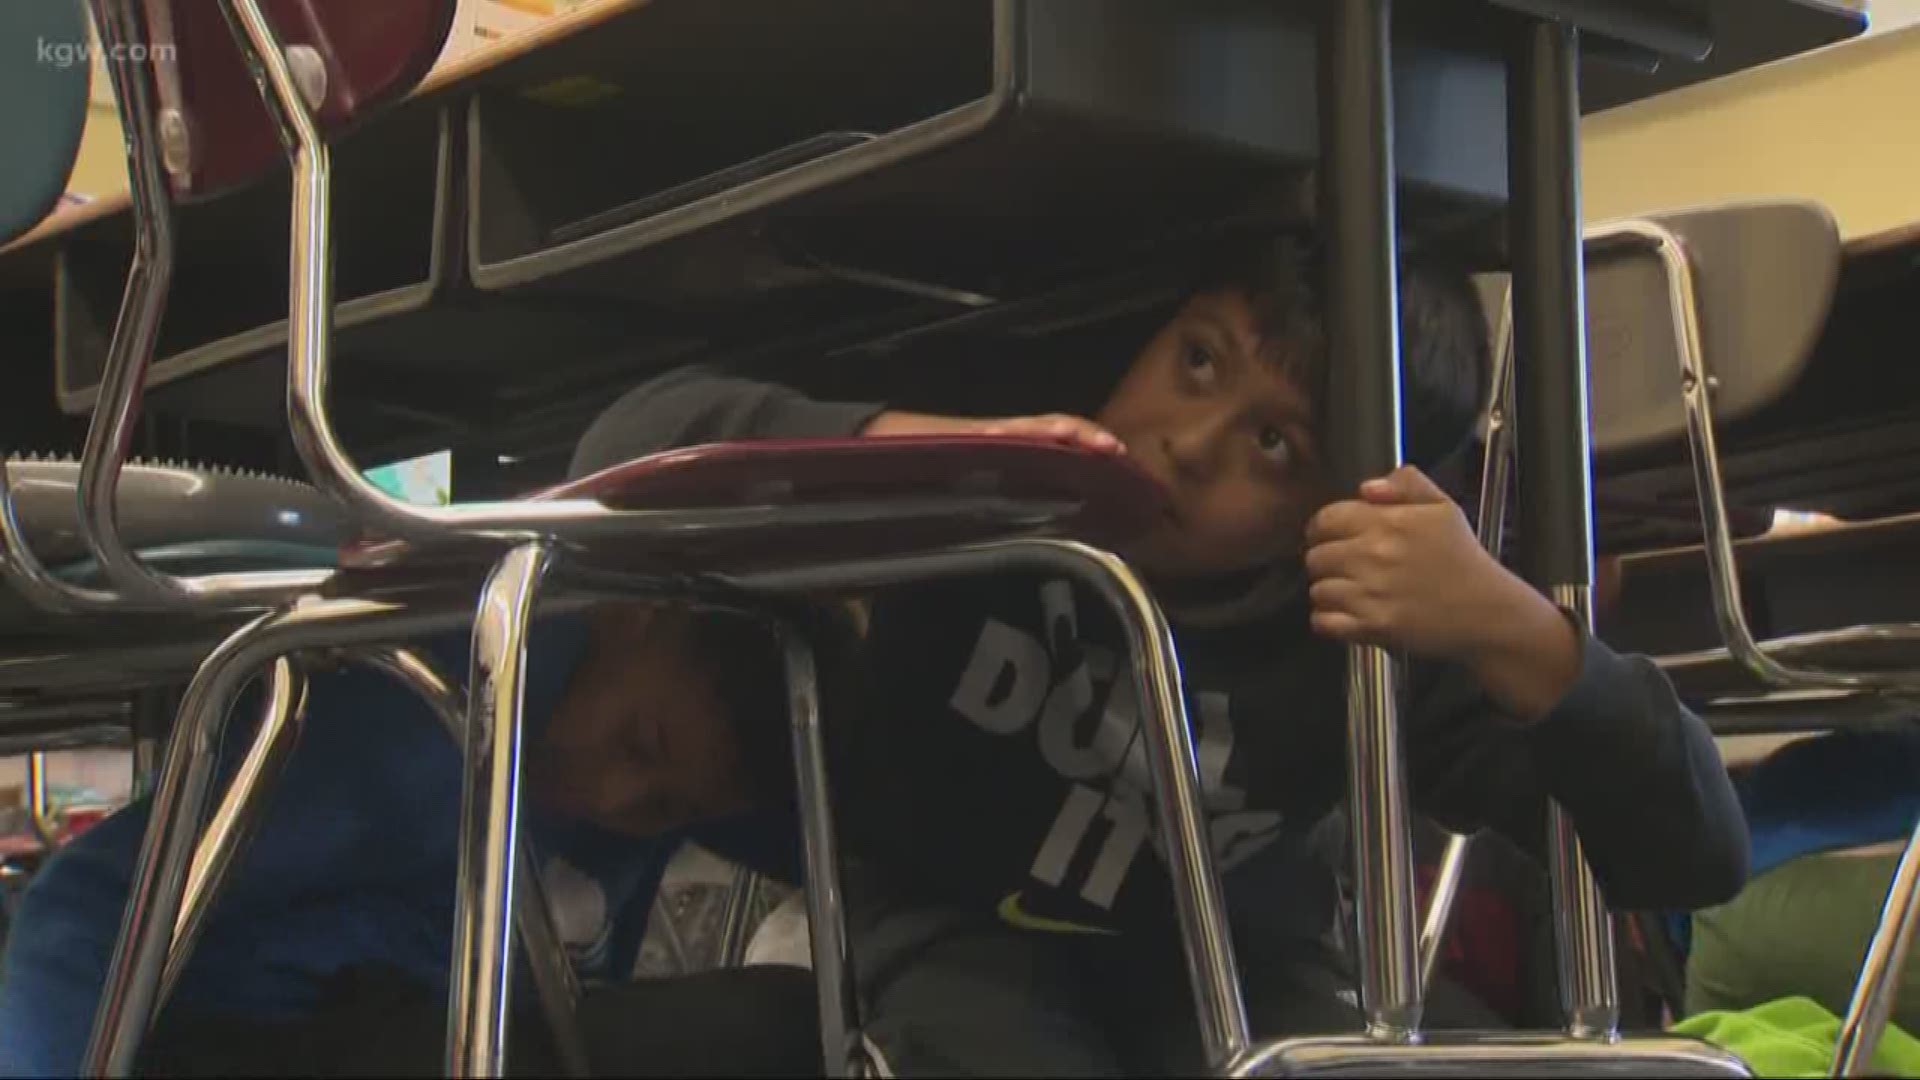 Student at Riegler school joined the nationwide earthquake drill The Great ShakeOut.